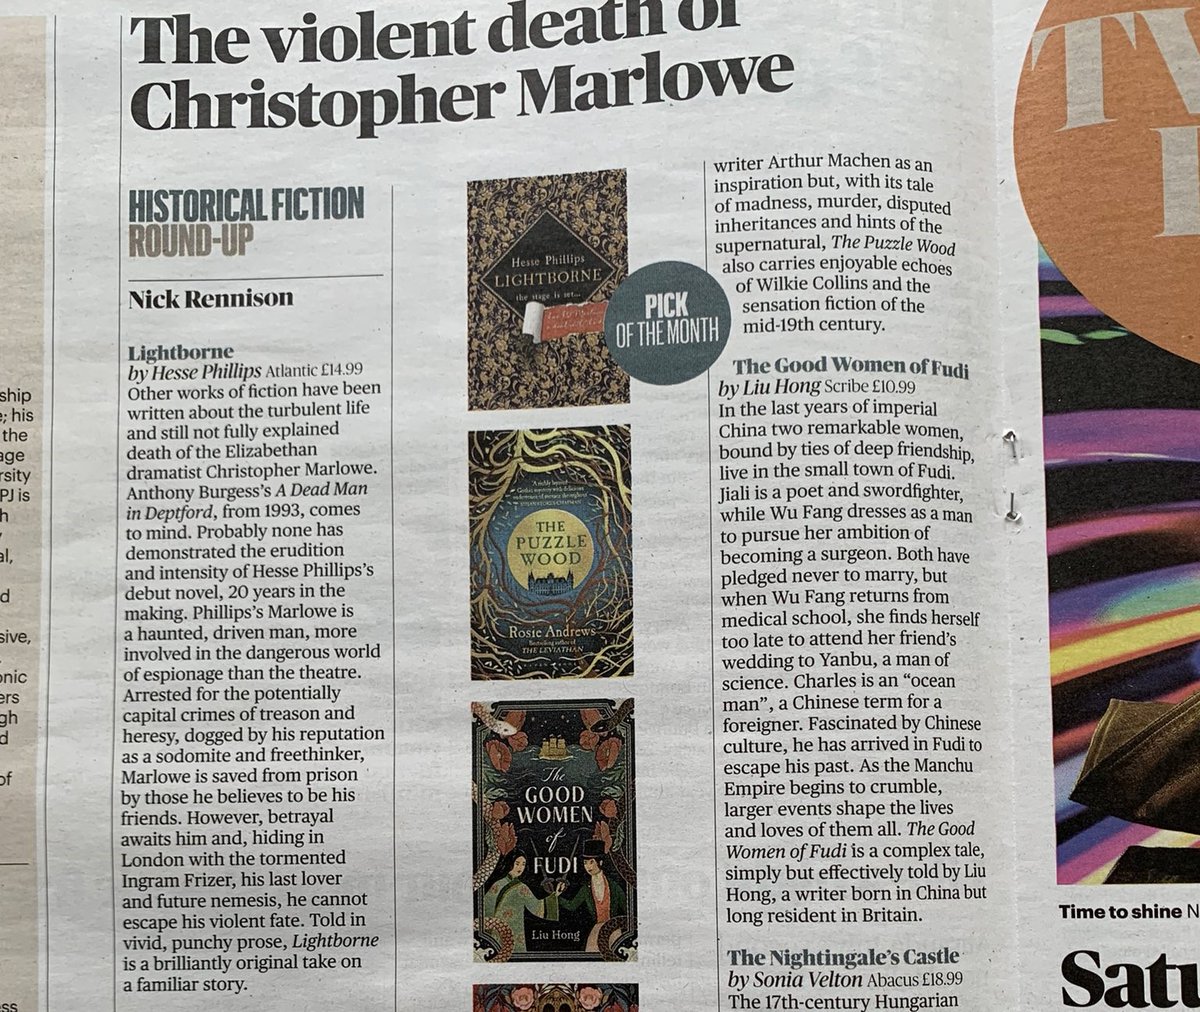 Thanks so much to the brilliant @HelenLEdwards for sending me this photo of #Lightborne 's stellar review in last Sunday's @thetimes. It's almost as good as seeing the real thing!